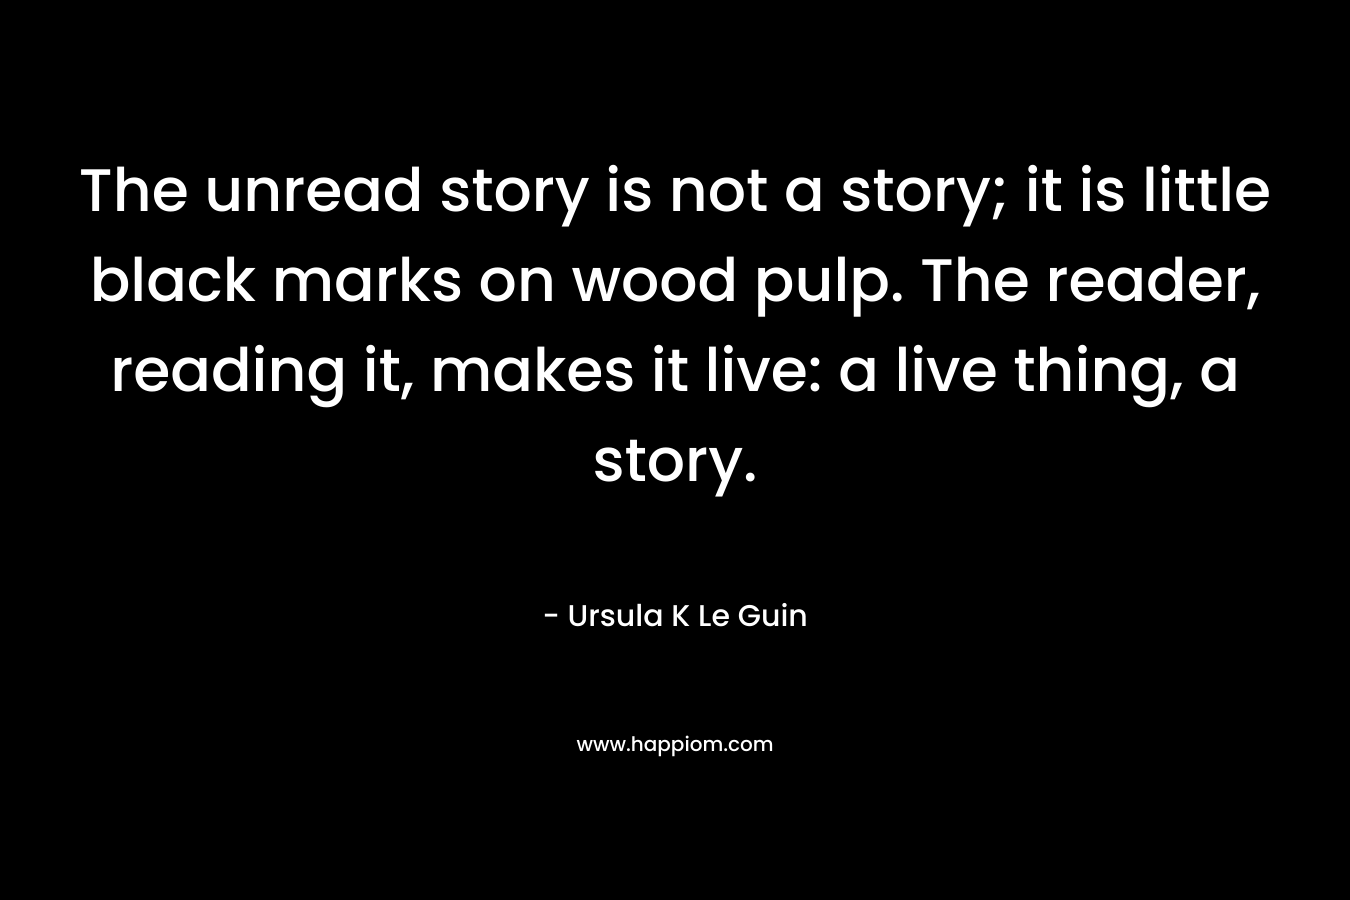 The unread story is not a story; it is little black marks on wood pulp. The reader, reading it, makes it live: a live thing, a story.